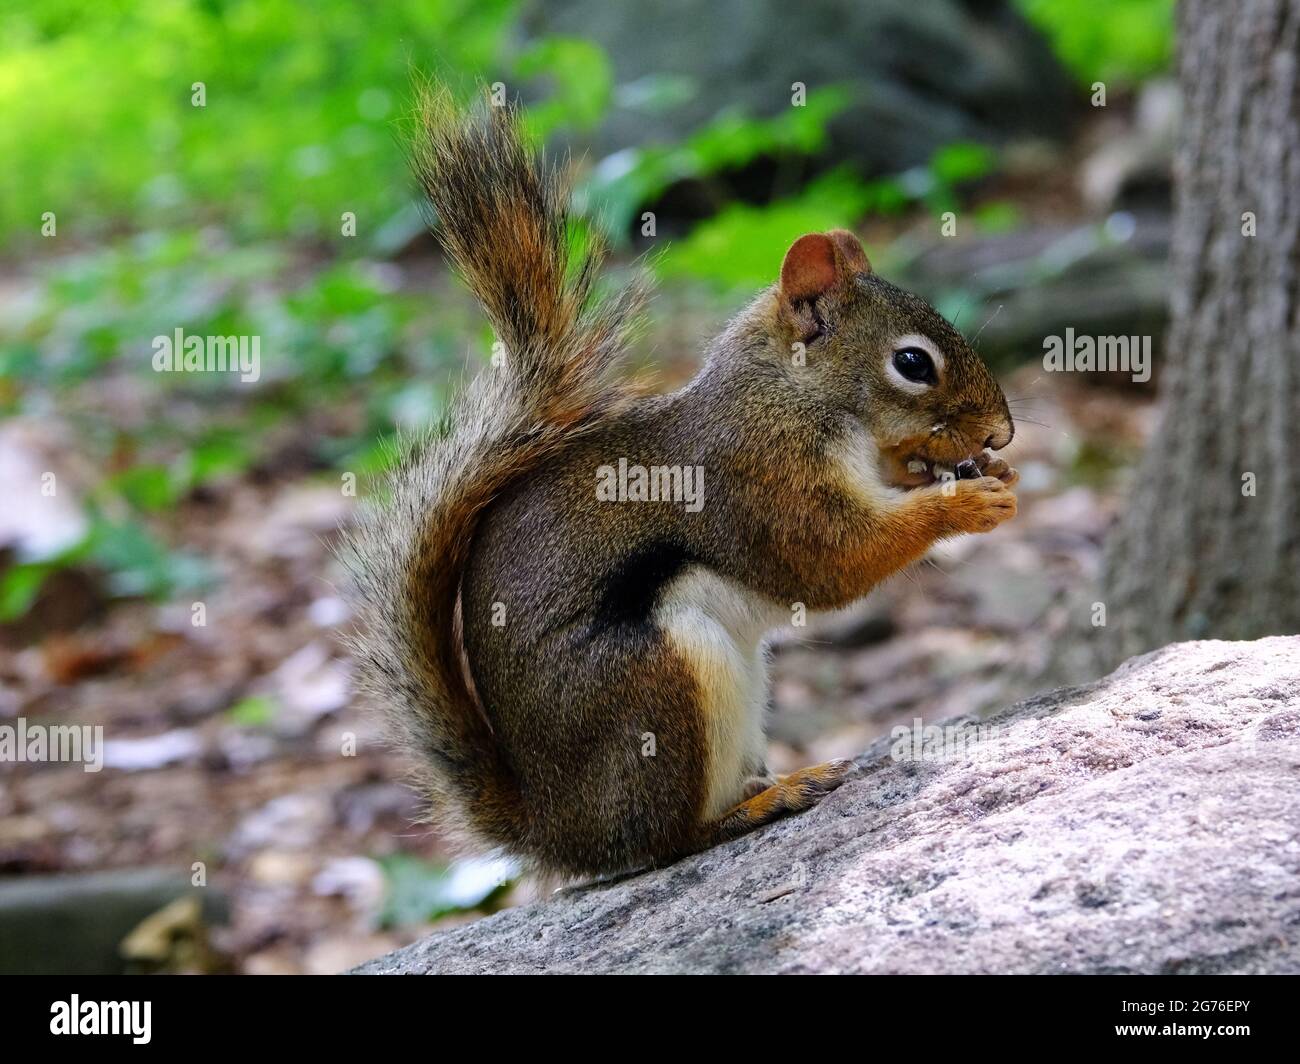 American red squirrel (Tamiasciurus hudsonicus) eating sunflower seeds on a rock, looking extremely cute. Ottawa, Ontario, Canada. Stock Photo